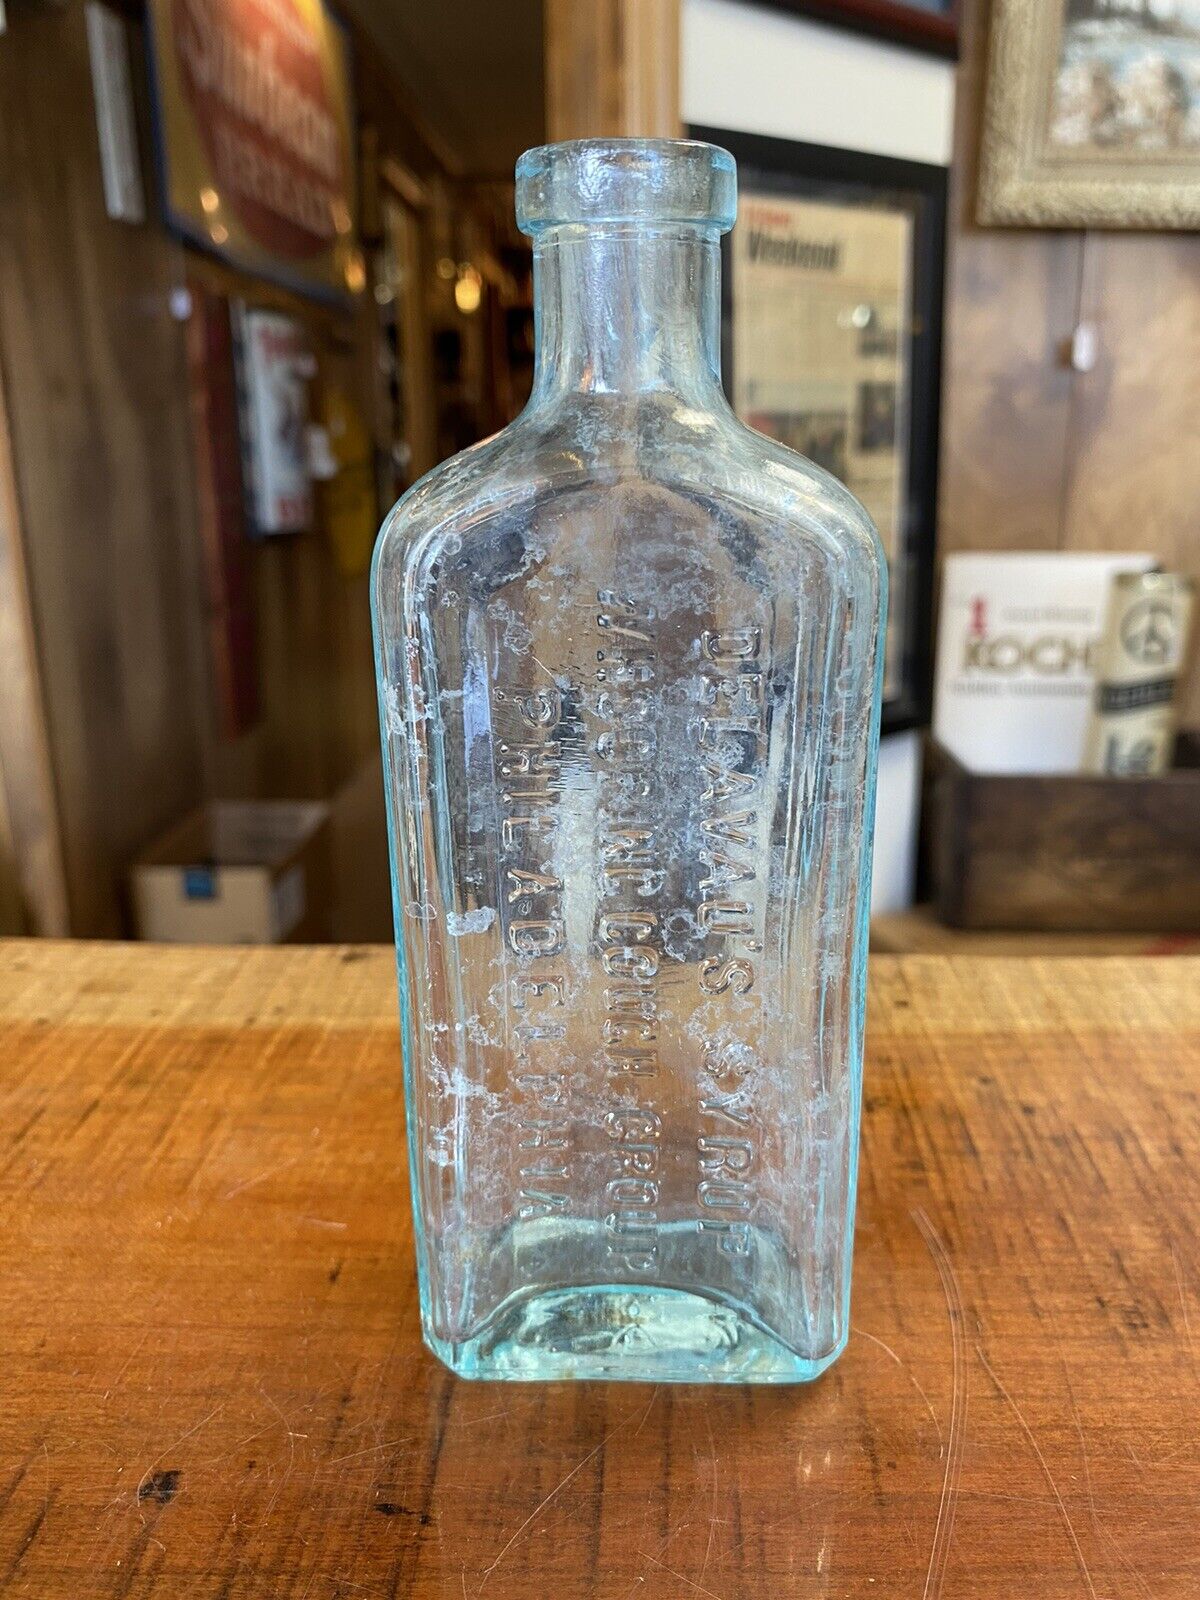 Vintage 1890’s Delavau’s Whooping Cough-Croup Syrup Glass Medicine Bottle